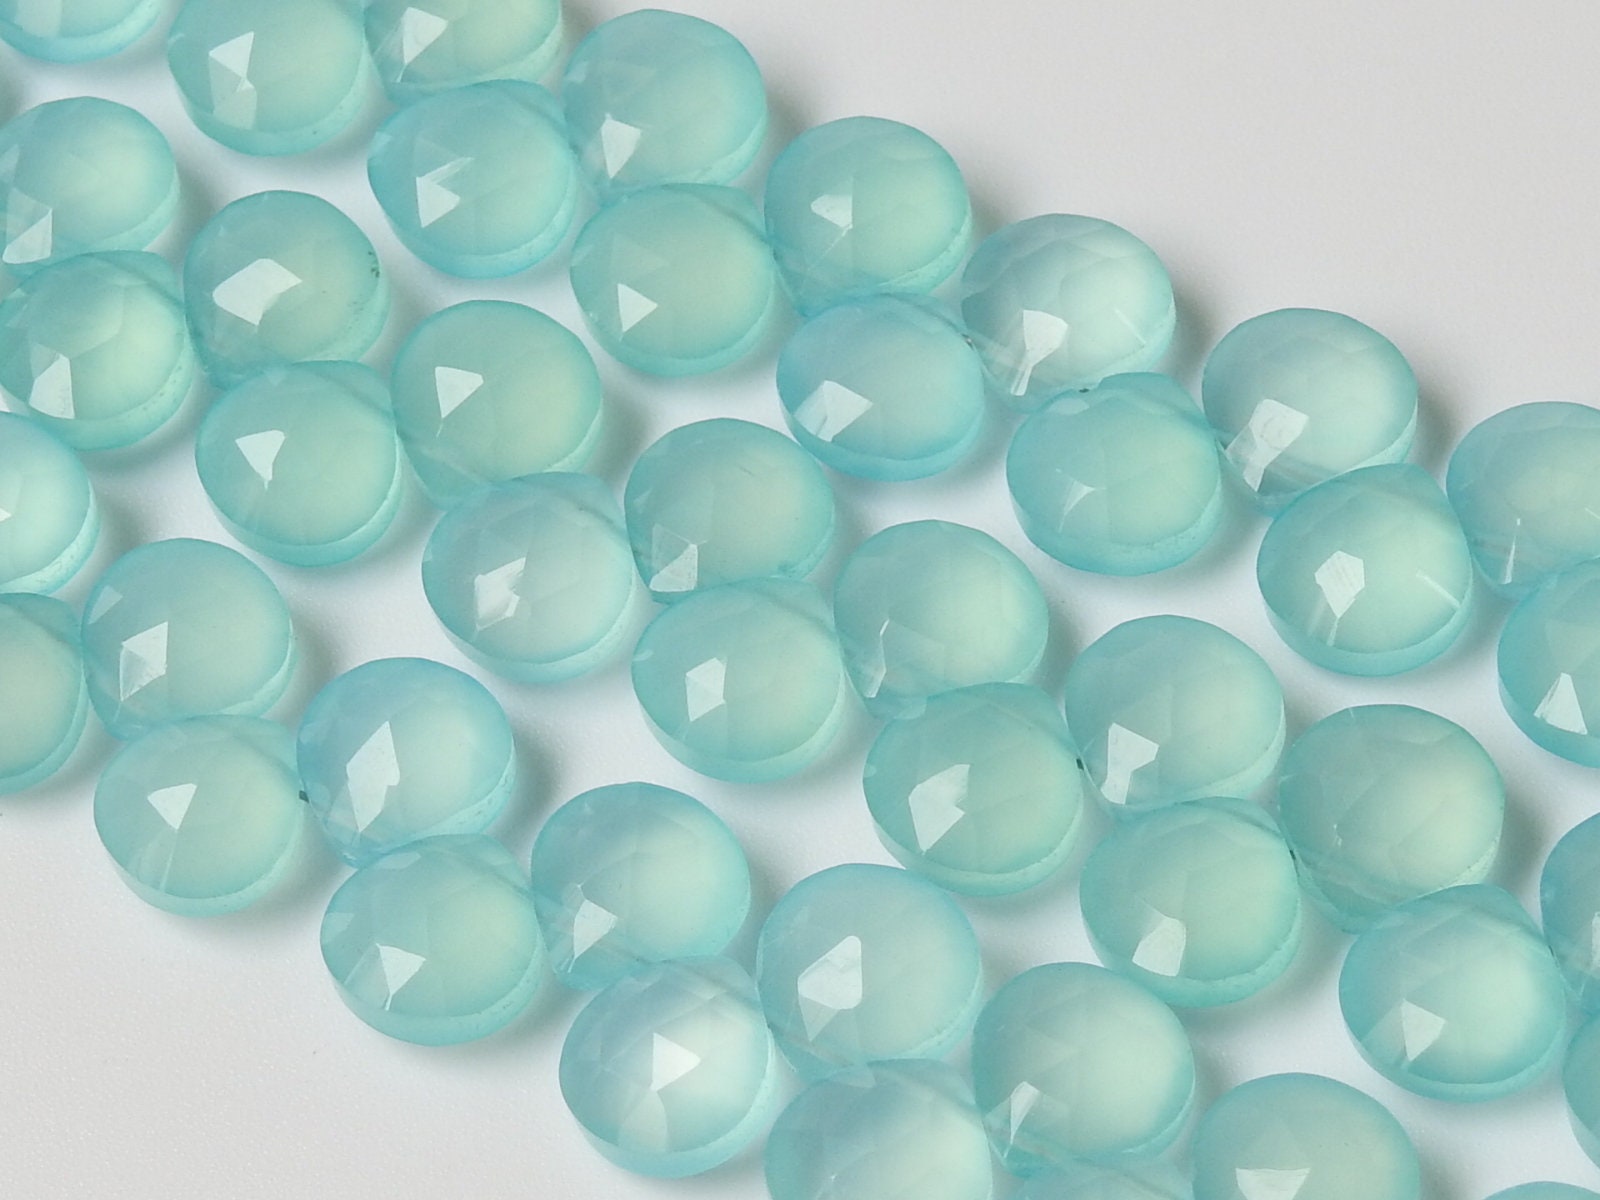 Aqua Blue Chalcedony Faceted Hearts,Teardrop,Drop,Loose Stone,Handmade,Earrings Pair,For Making Jewelry 4Inch Strand 8X8 MM Approx (pme)CY2 | Save 33% - Rajasthan Living 16